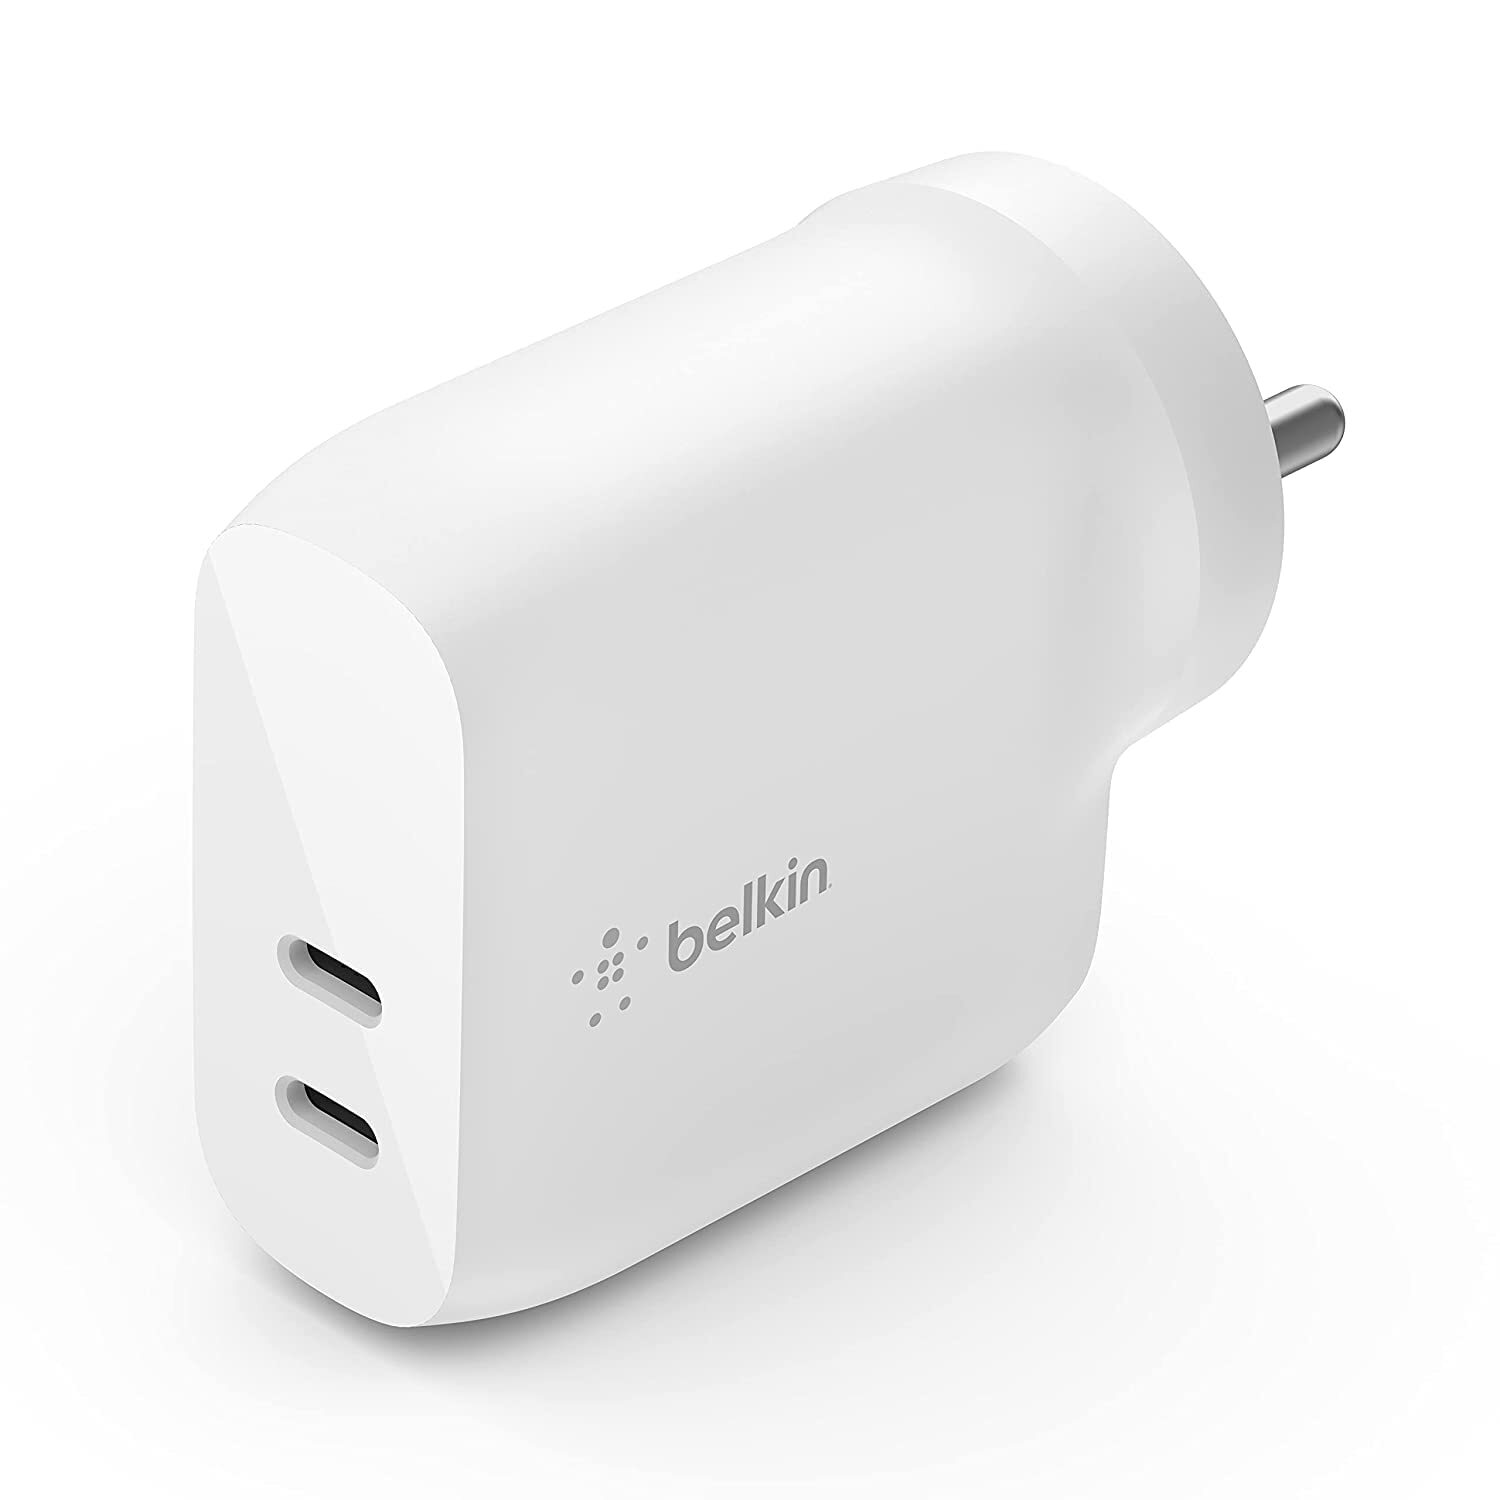 Belkin Fast Charging,Universally Compatible Dual USB-C 40W Pd Wall Charger-Power Delivery 3.0 Certified,Each Port Delivers 20W of Power for All Cellular Phones, USB C/Type C Mobile Phones- White